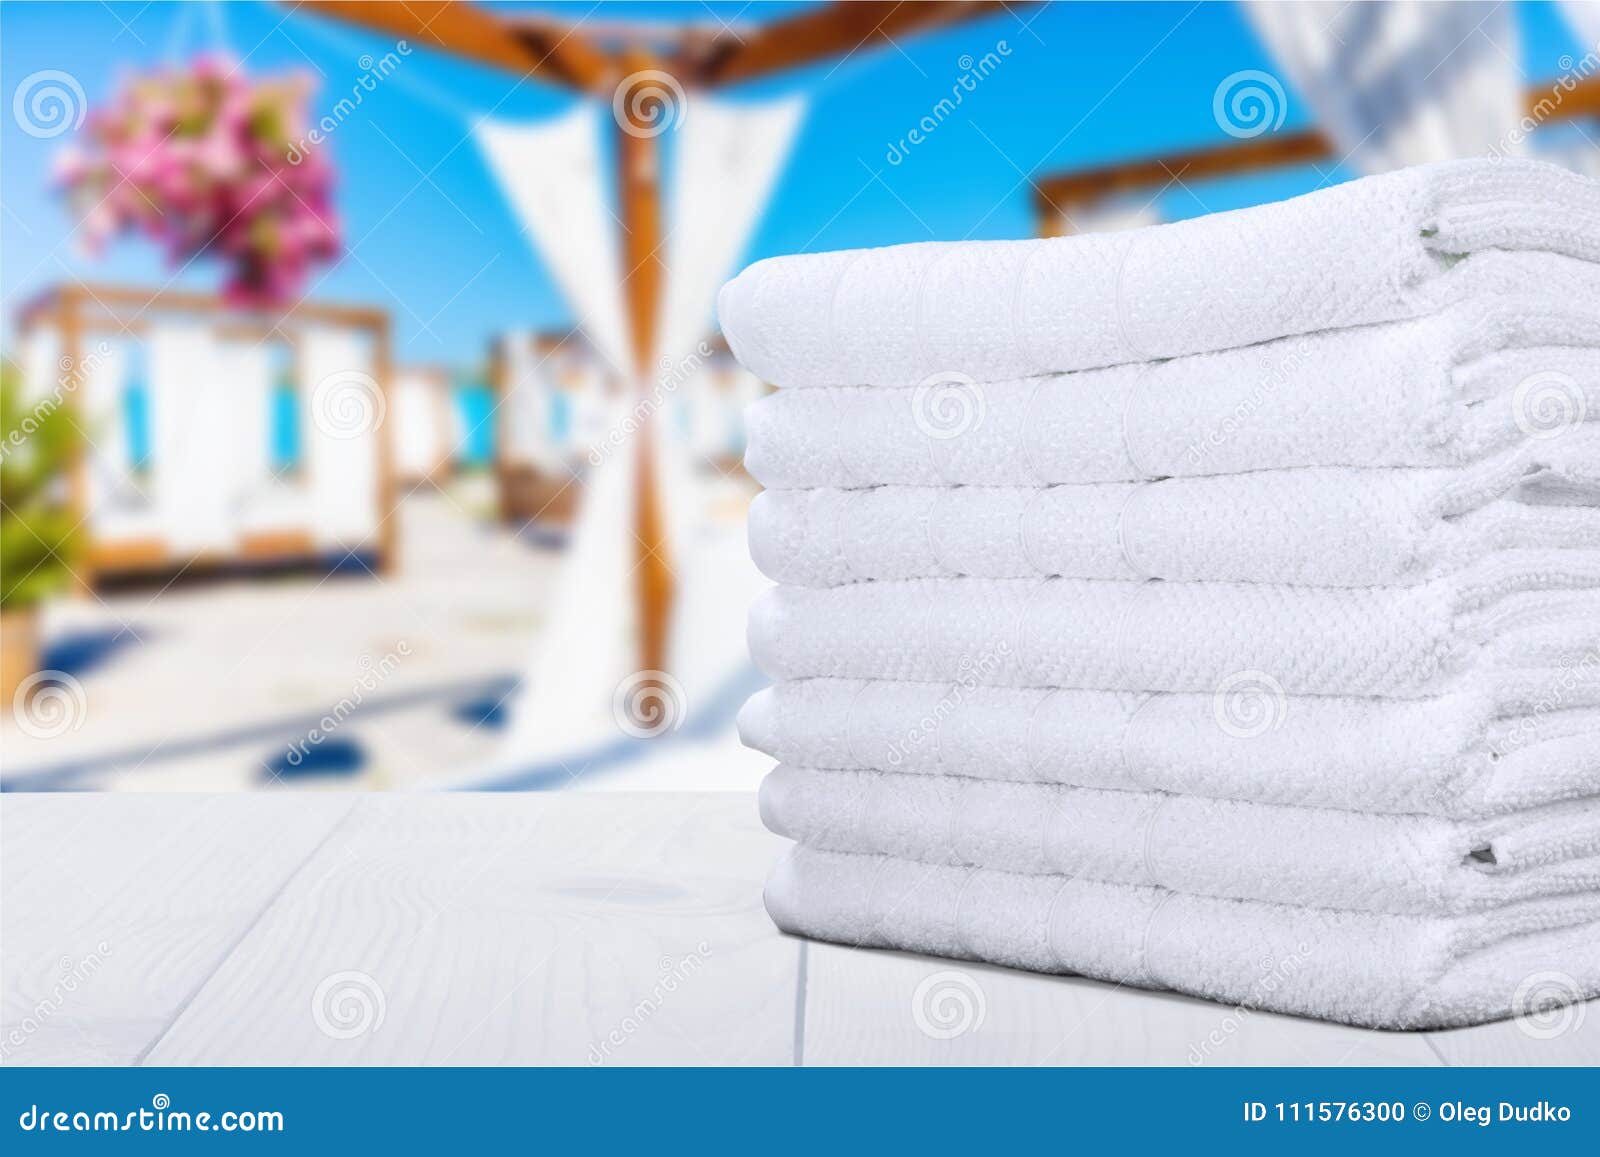 750+ Towel Pictures  Download Free Images on Unsplash